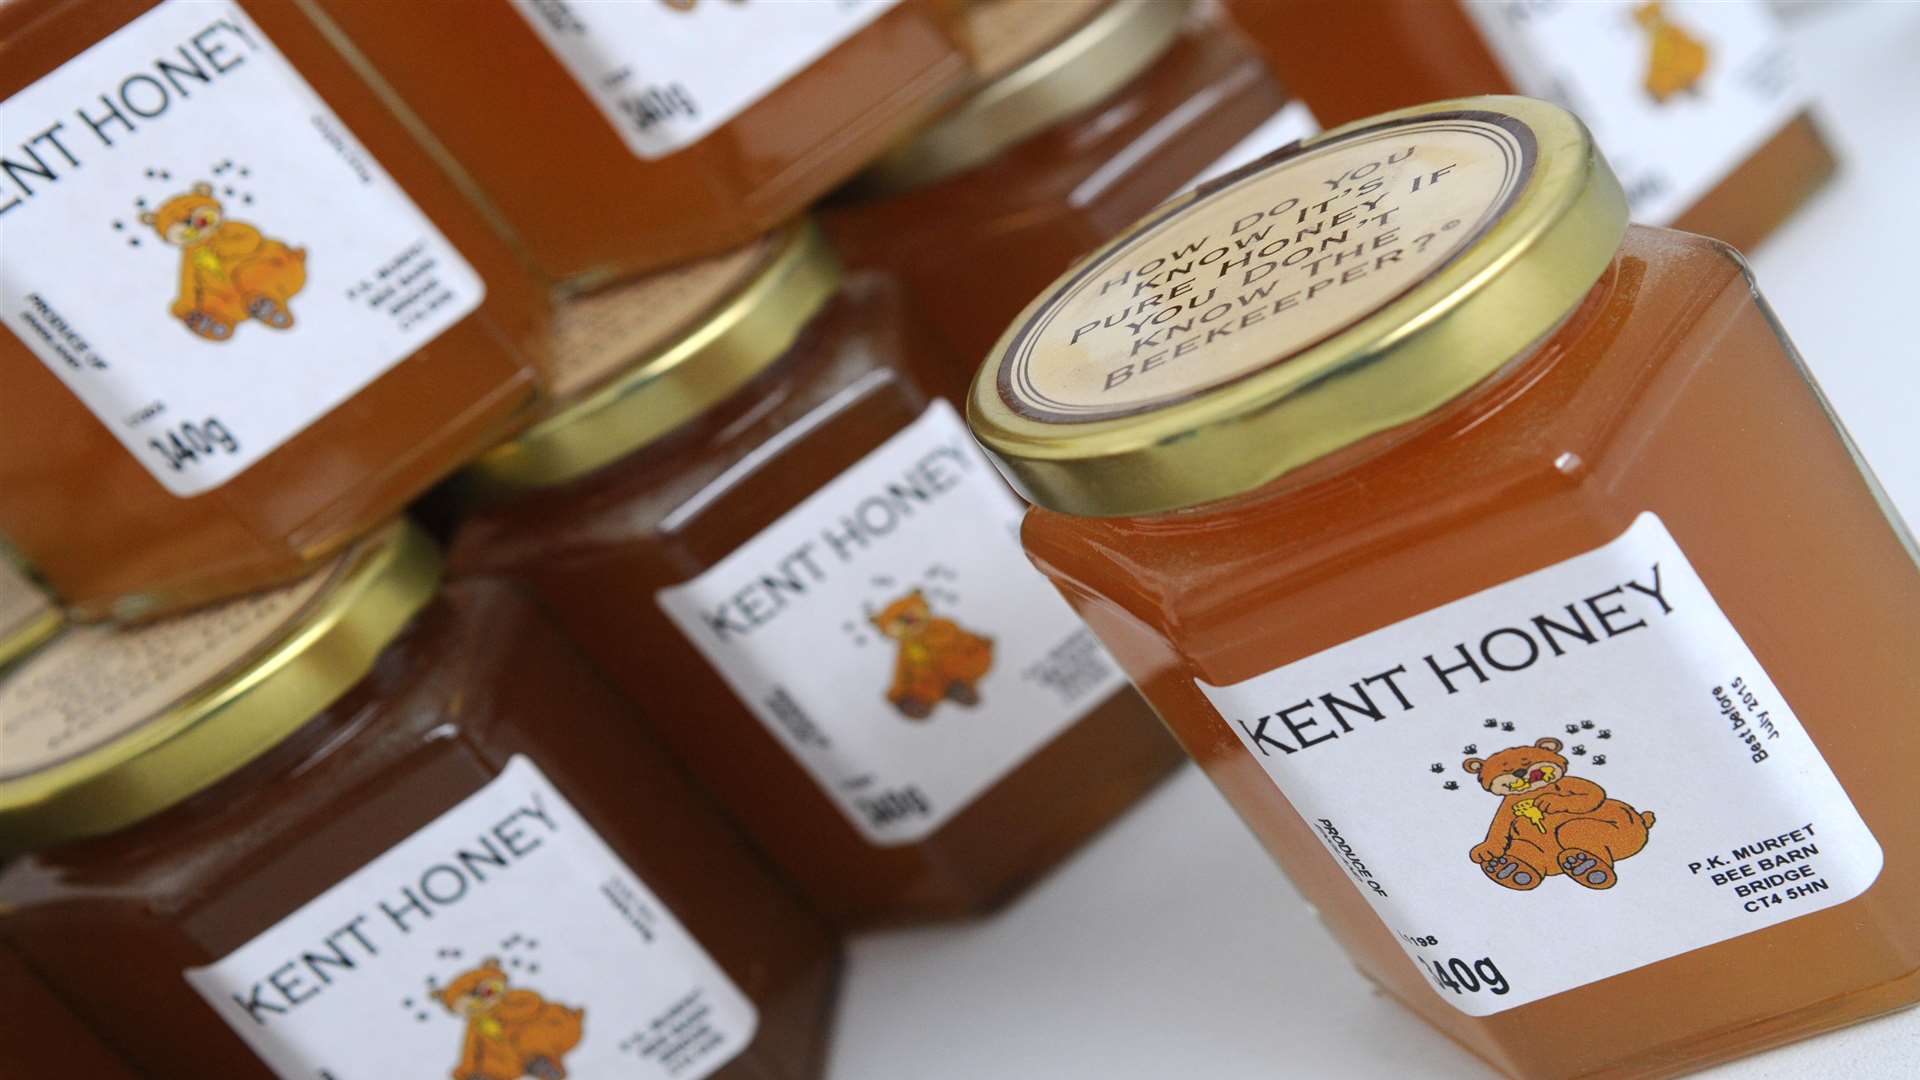 Anyone can call in to buy honey at Highland Cort Farm